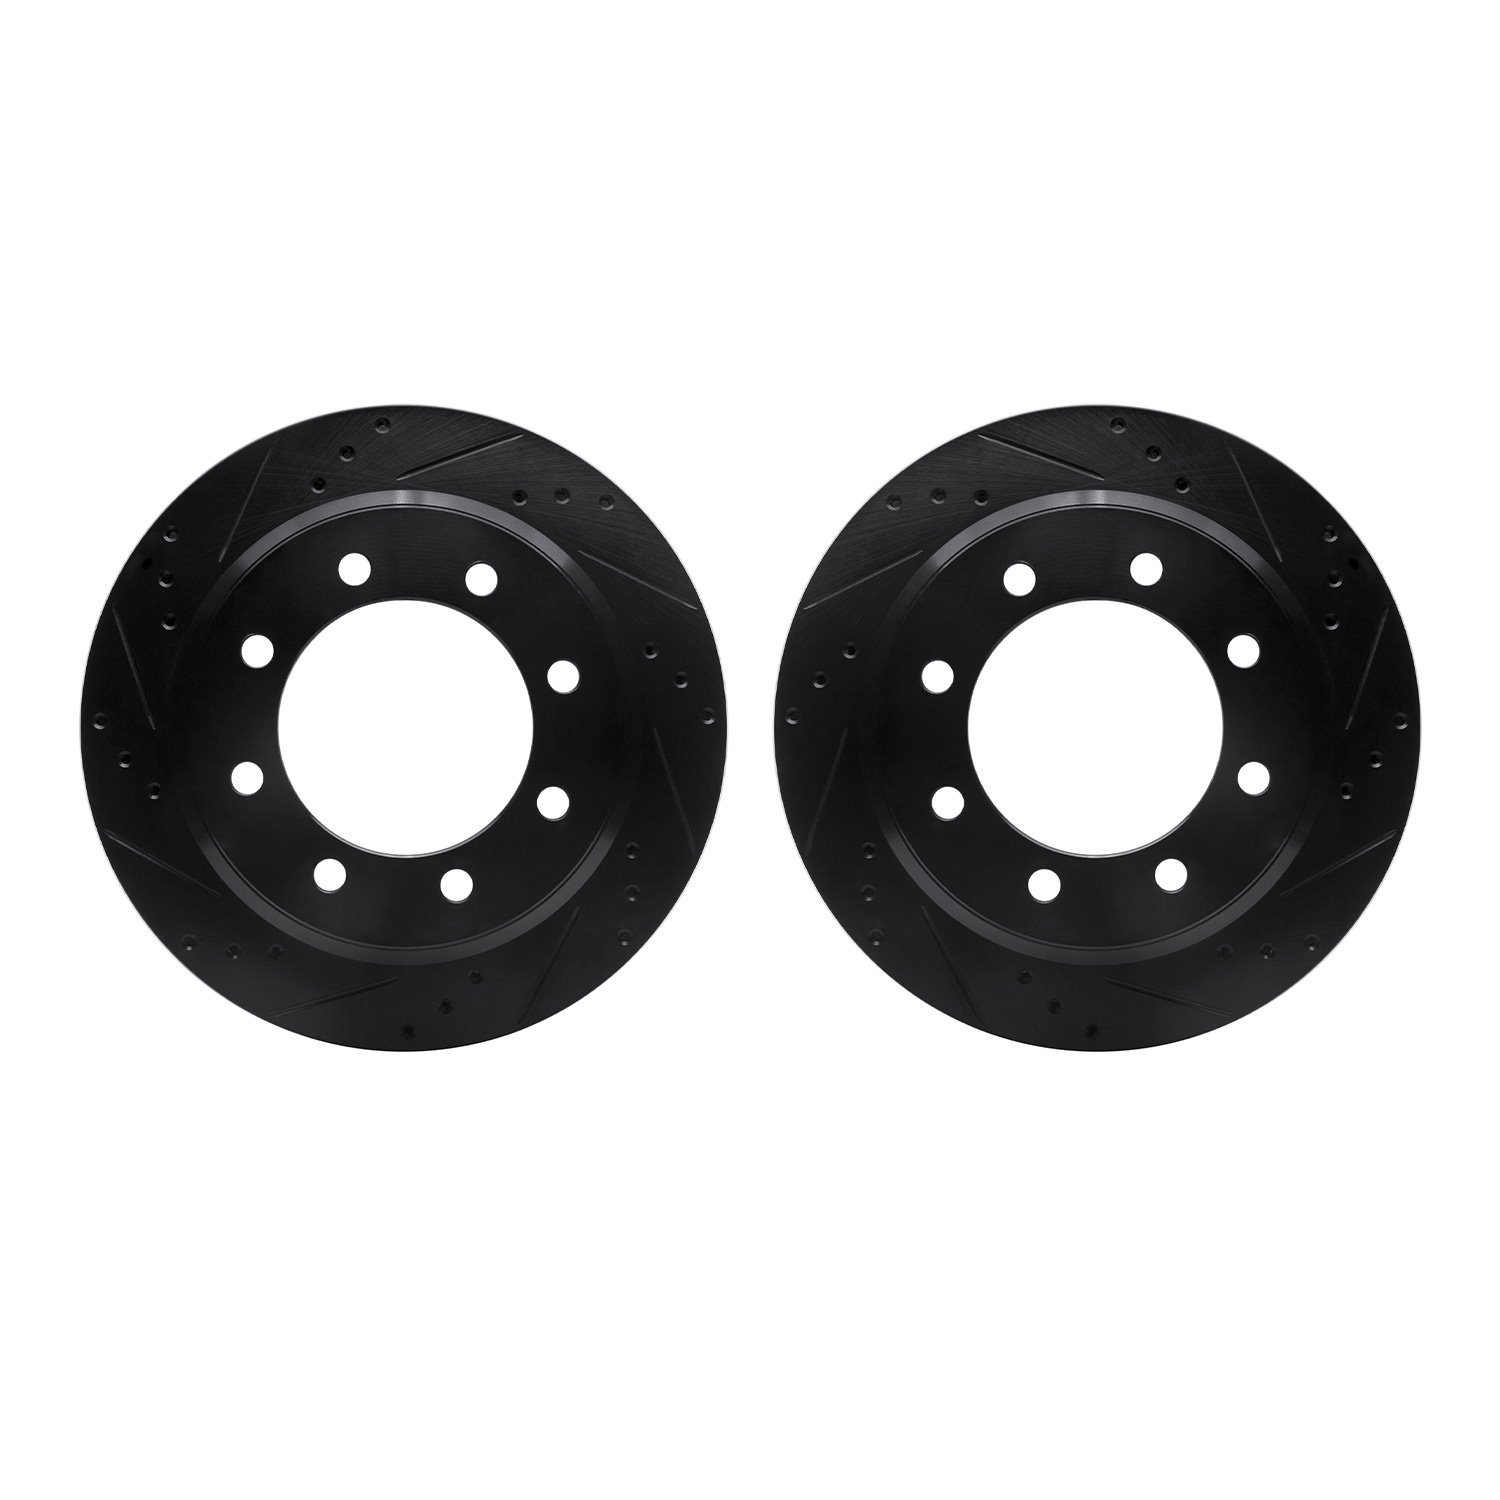 8002-54189 Drilled/Slotted Brake Rotors [Black], Fits Select Ford/Lincoln/Mercury/Mazda, Position: Rear